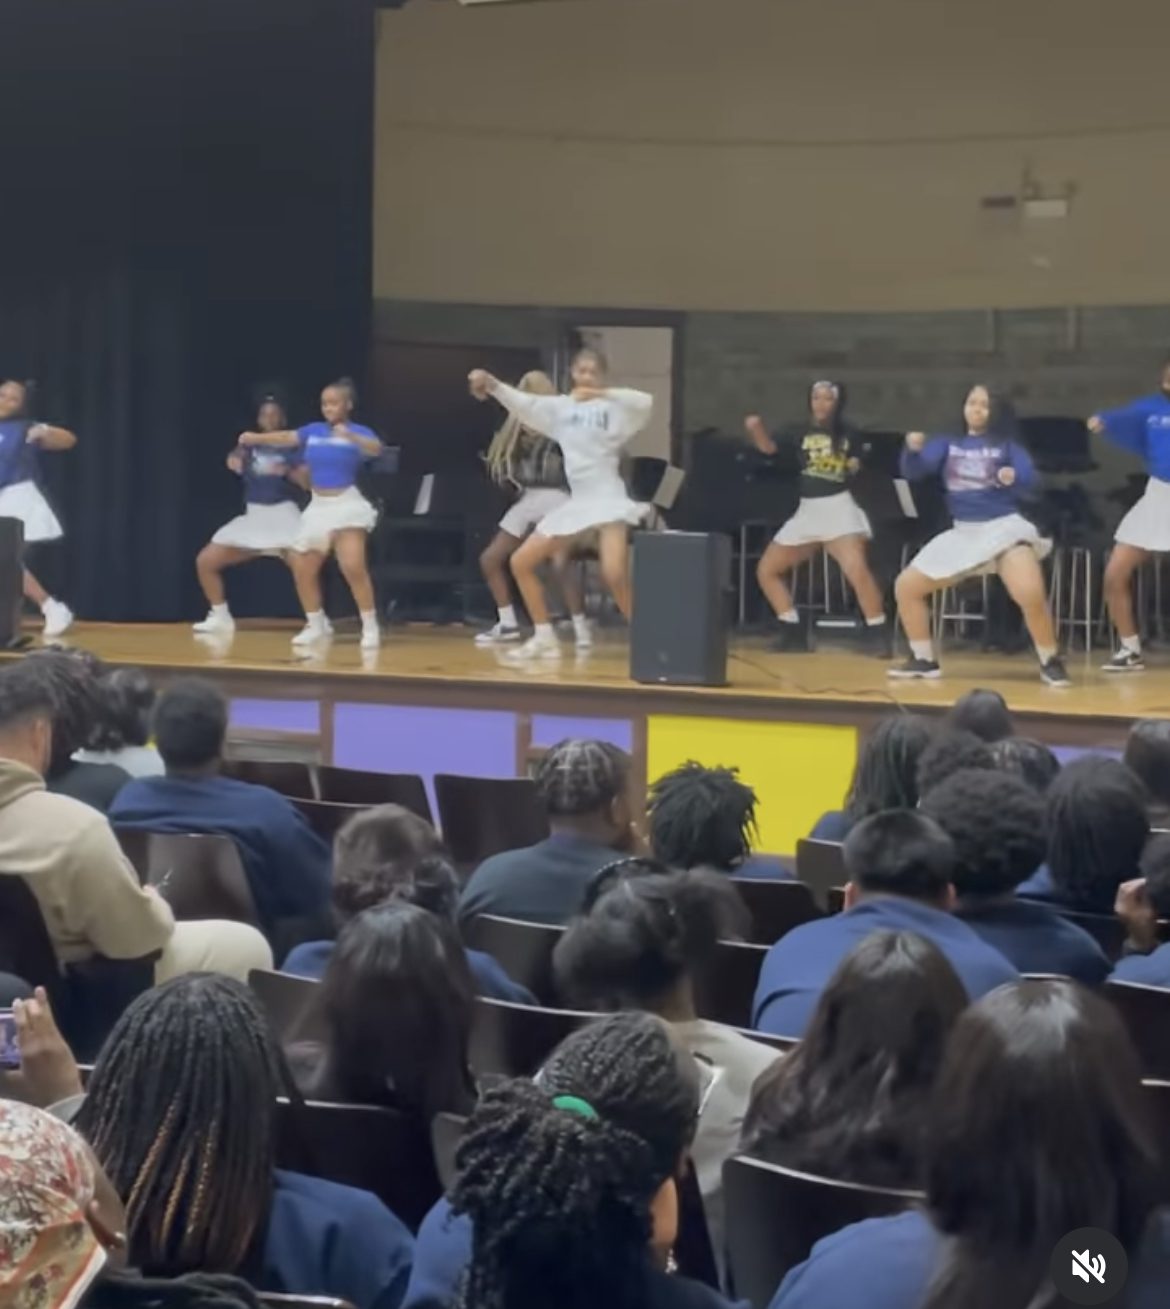 The dance performing at Baker's town hall. The students are in the middle of their dance routine as their on stage. The crowd is filled with students, teachers, and other staff members. The dancers are wearing a gray skirt with different graphic sweaters on. The graphics on the sweaters aren't readable.